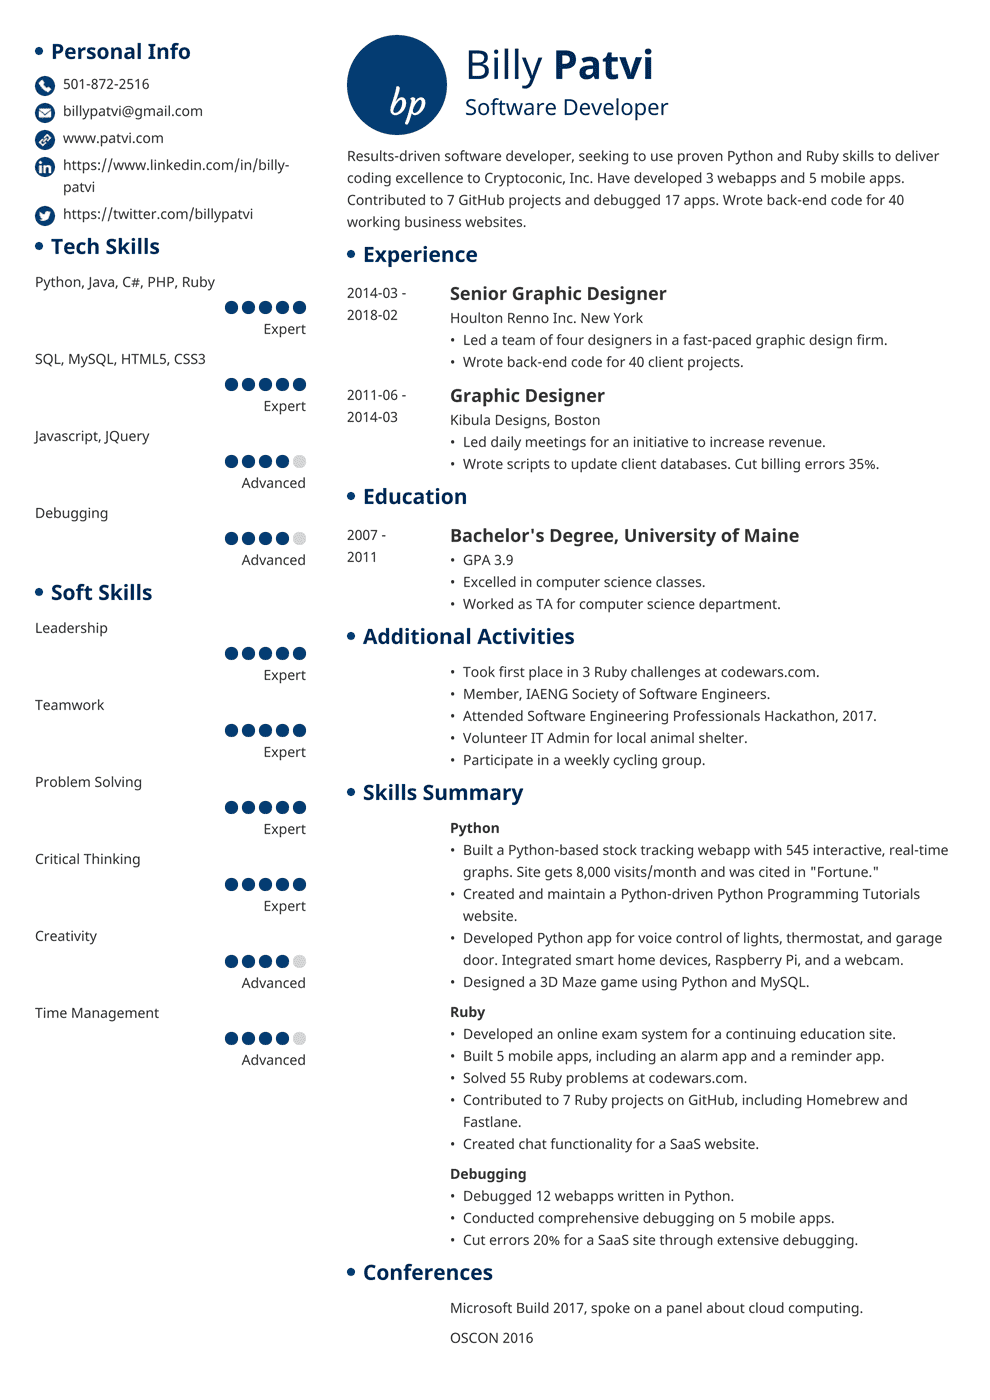 Career Change Resume Sample And Complete Guide 20 Examples